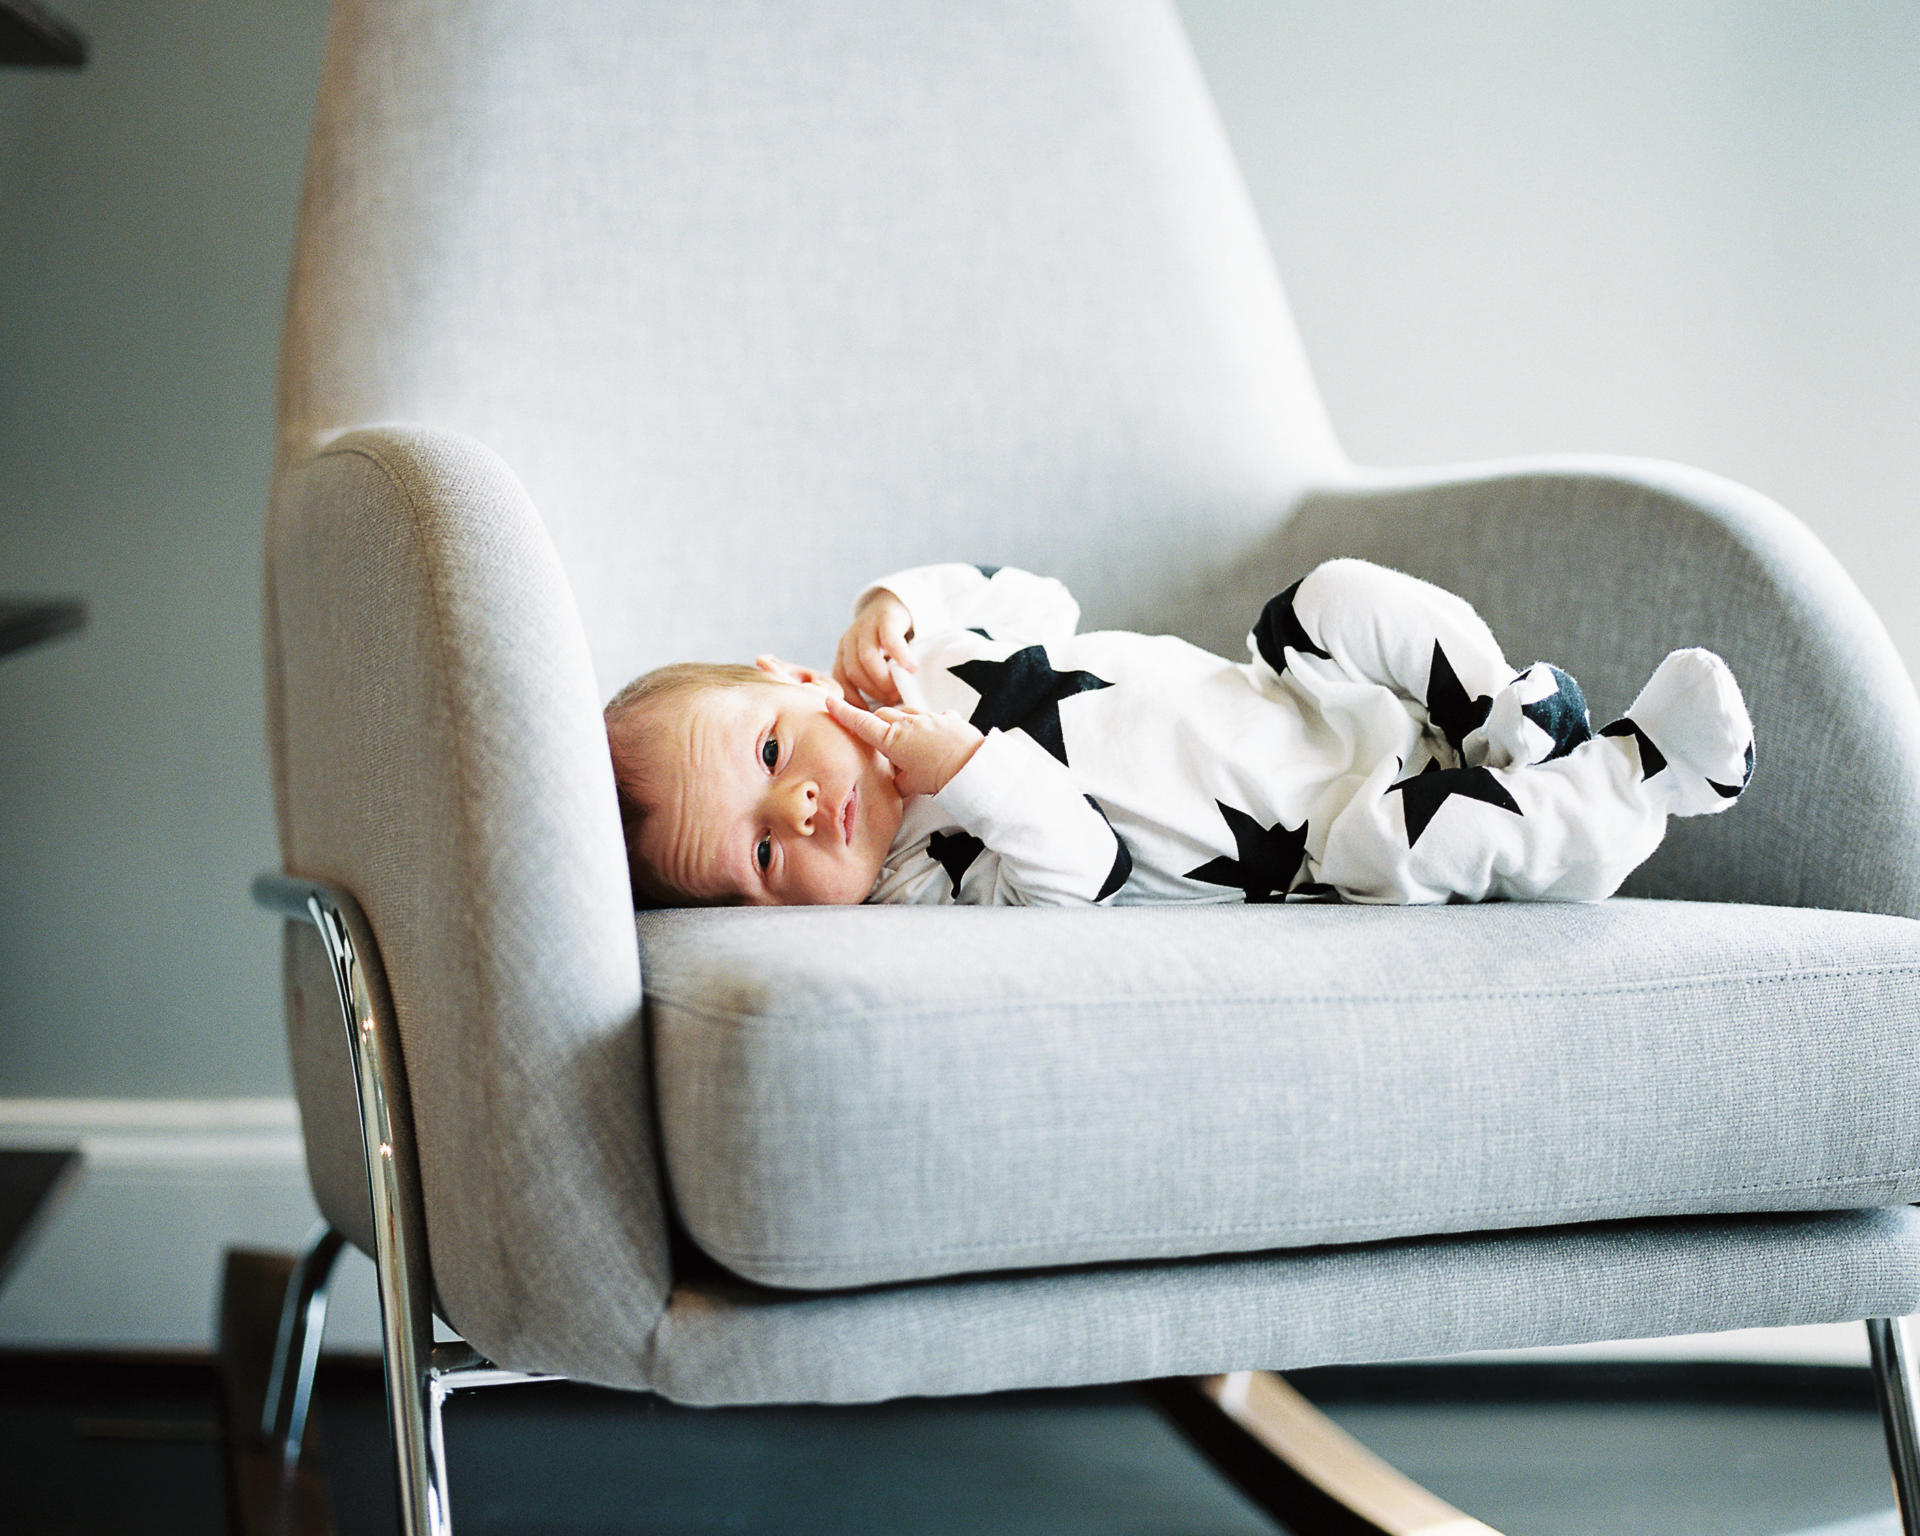 Bookmark this post to read Holden's birth story and find inspiration for your modern nursery.